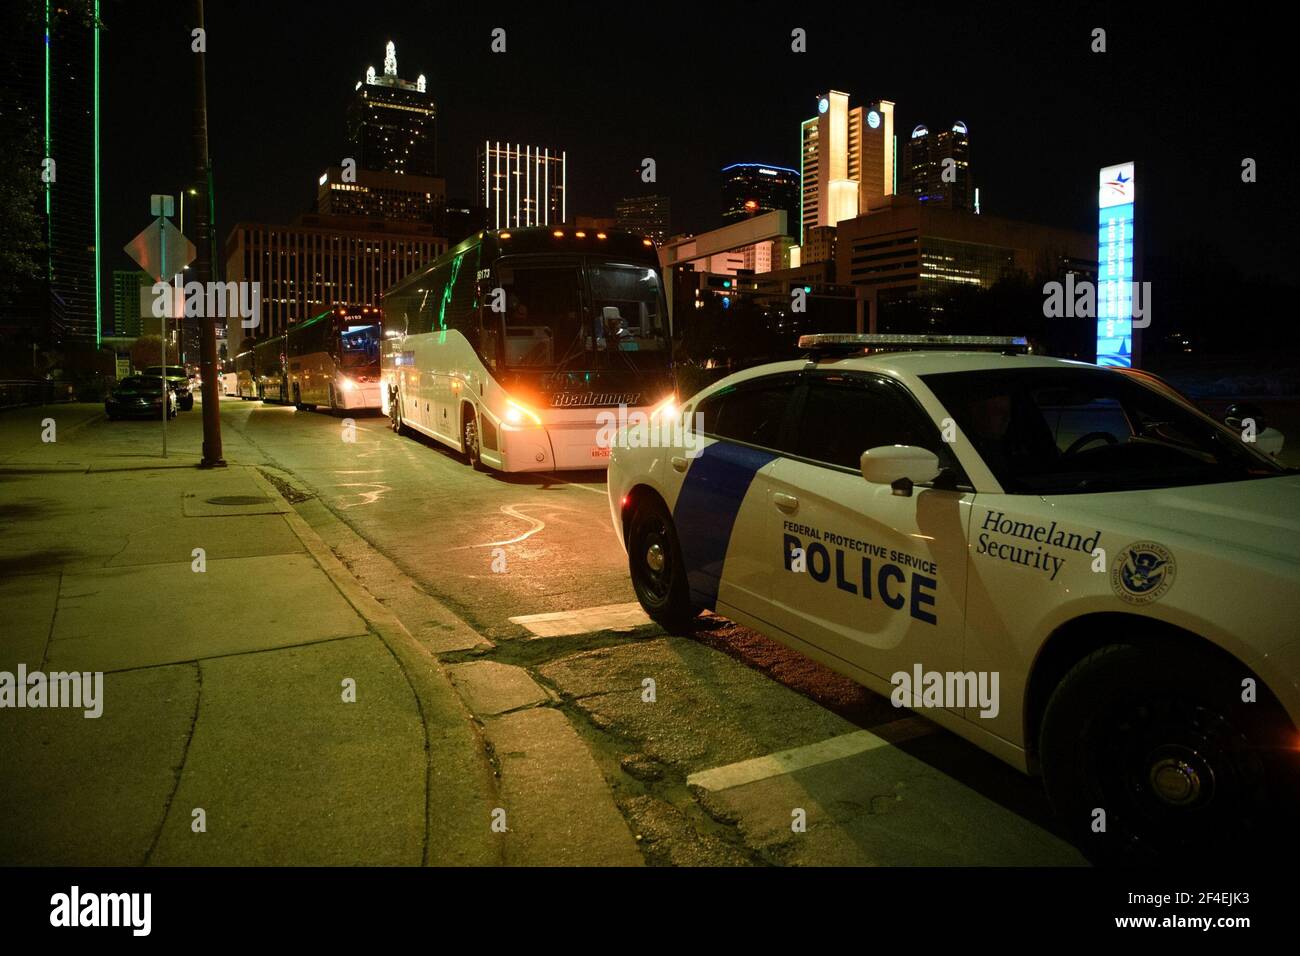 Dallas, Texas, USA. 20th Mar, 2021. Several charter buses carrying migrant teenagers arrived under Federal Protective Service escort to the Kay Bailey Hutchison Convention Center in Dallas on Saturday evening, March 21, 2021.The emergency intake site was opened Wednesday and is expected to hold nearly 3,000 teens, according to the Human and Health Services department. The site in Dallas and one in Midland TX have been opened to alleviate overcrowding at Border Patrol facilities and other HHS-run shelters.The current agreement is for 75 days and allows the use of space at the convention center Stock Photo